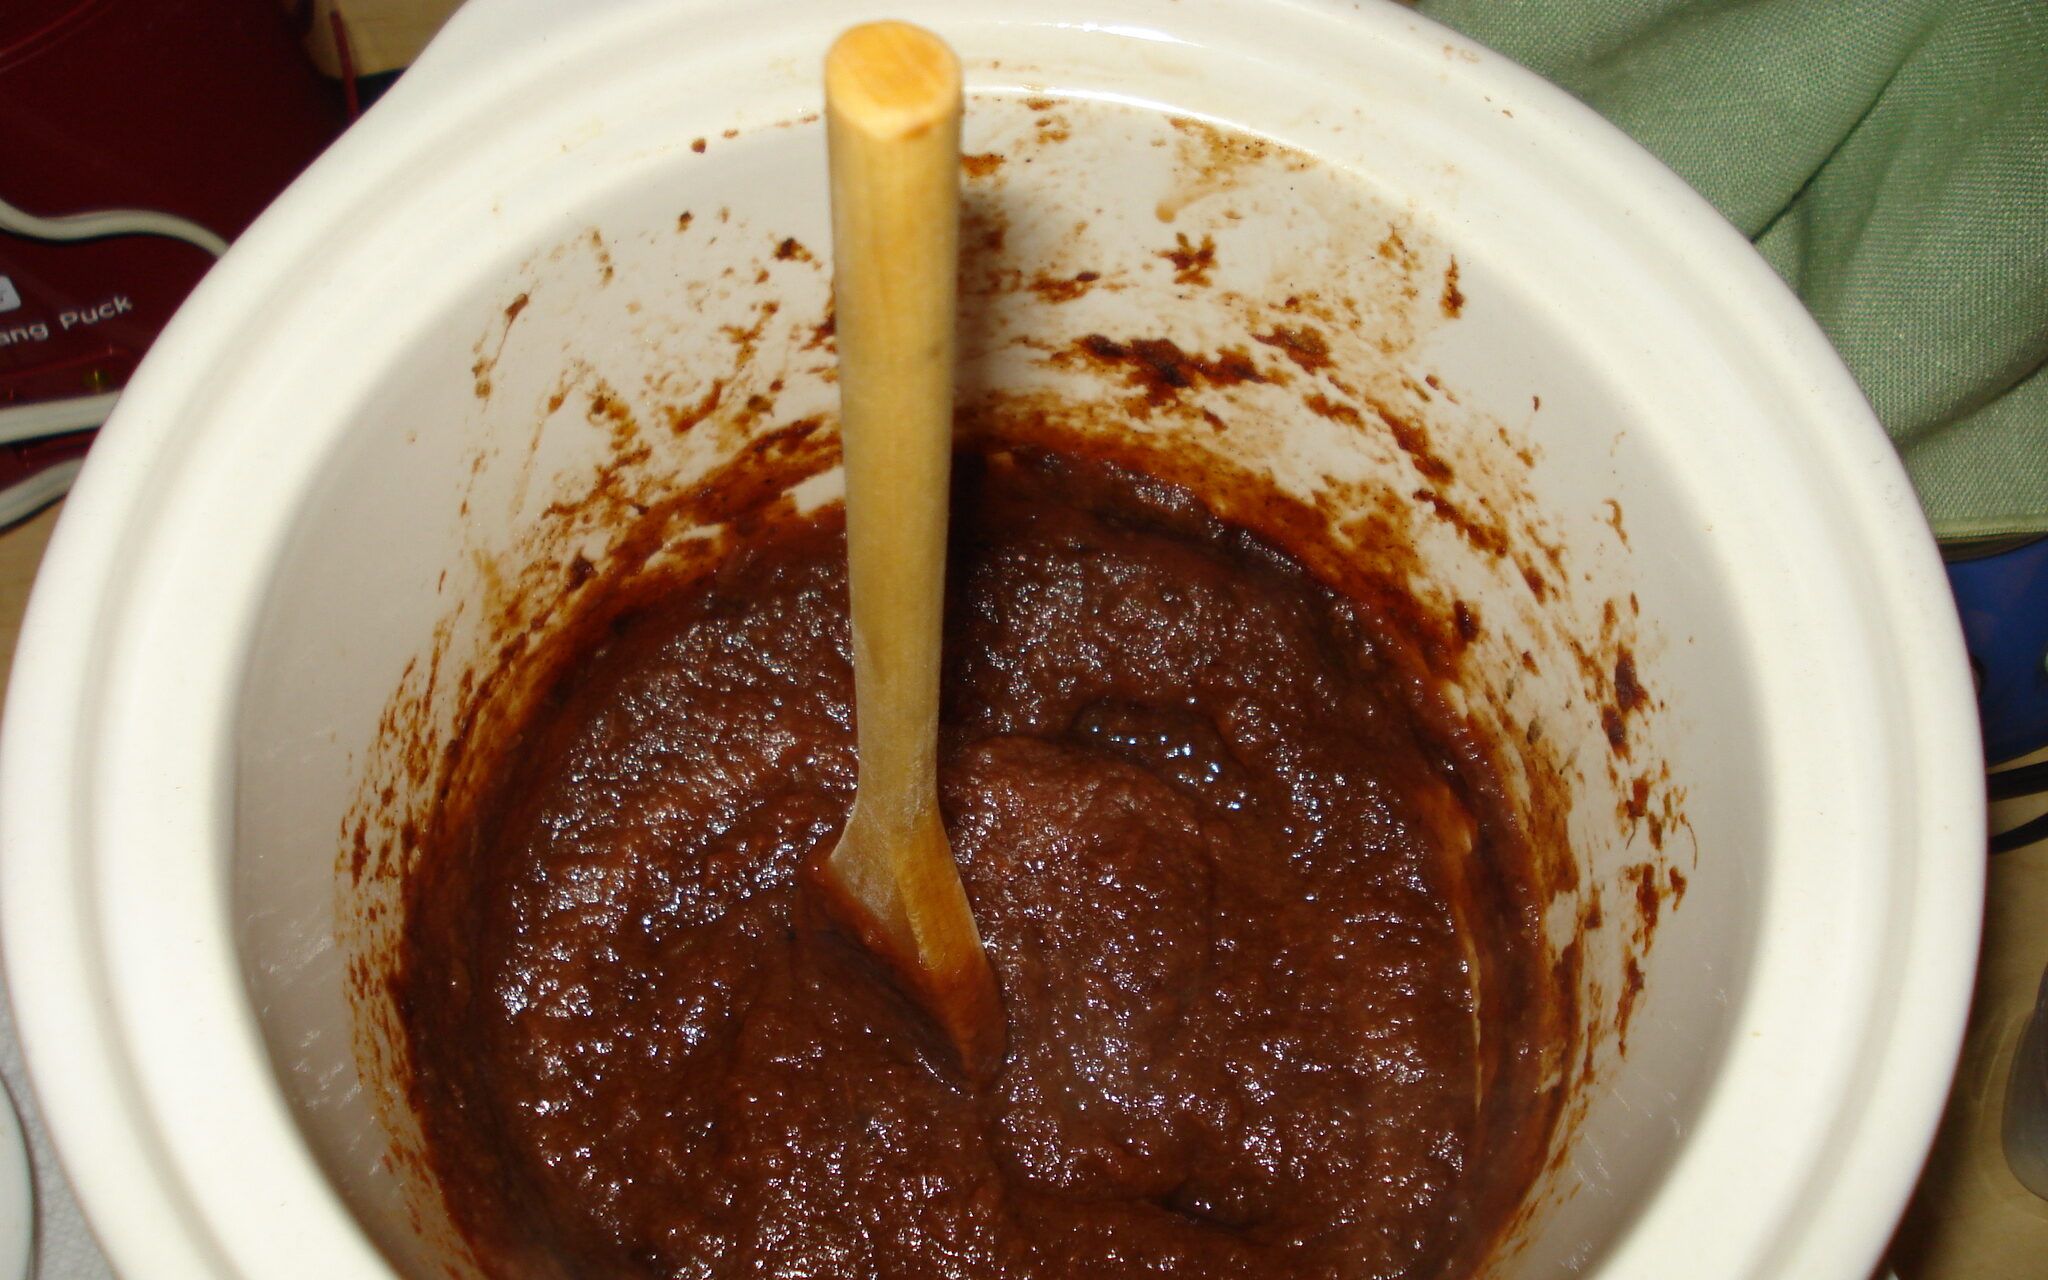 Apple Butter Almost Done (note dark brown color)